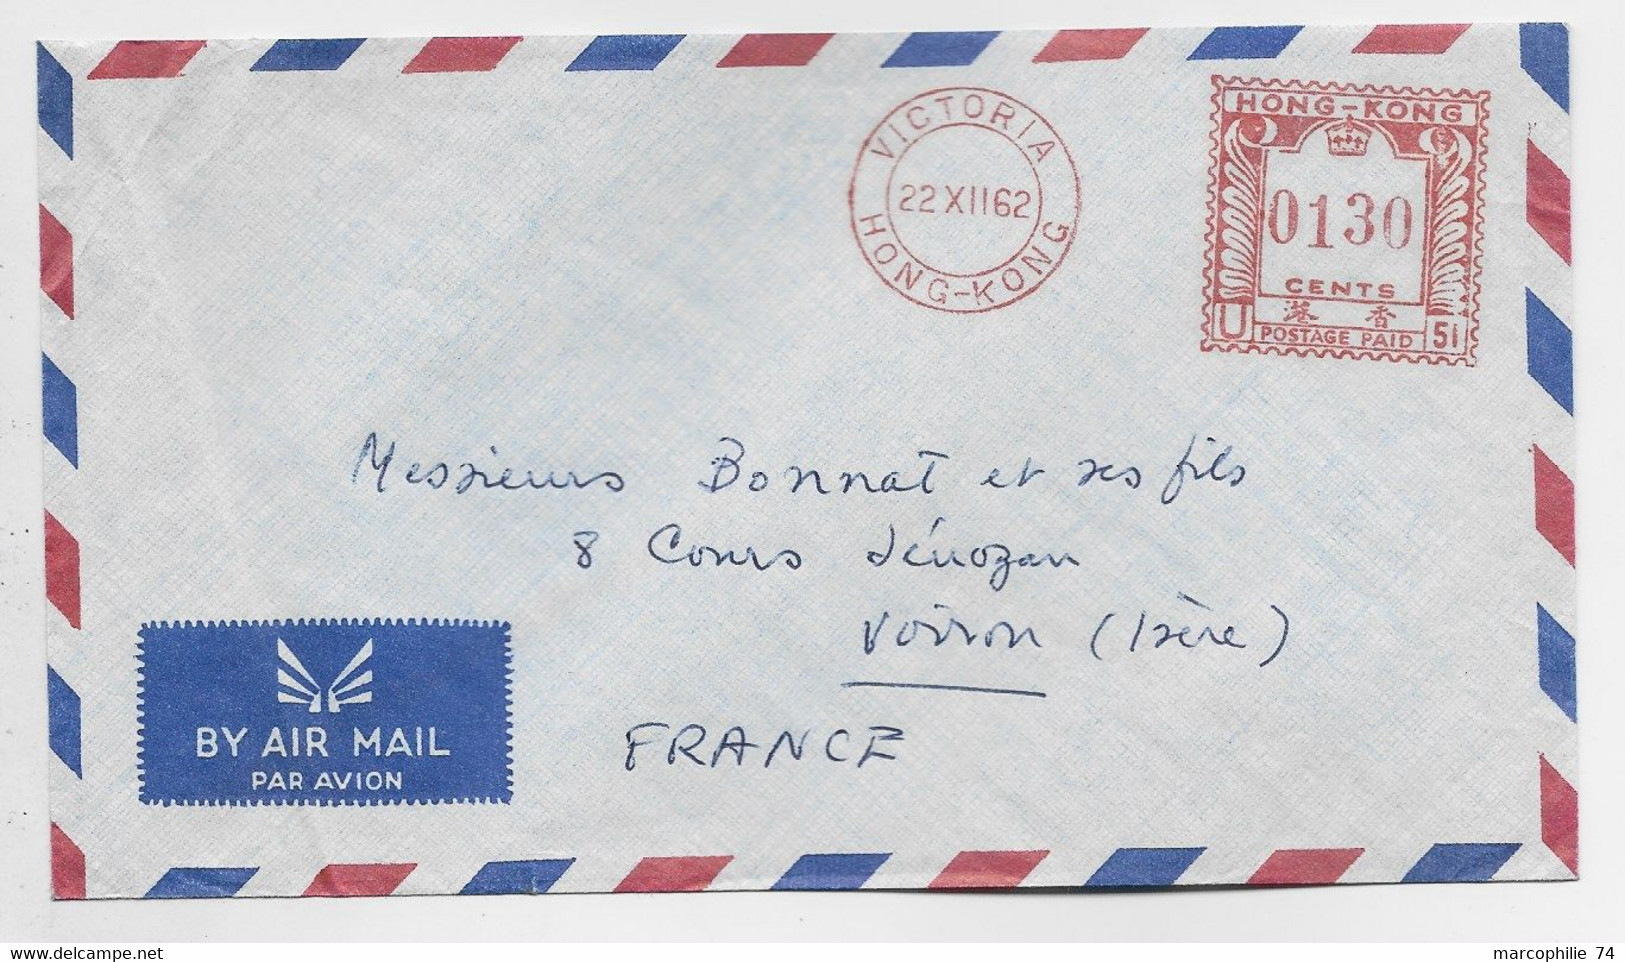 EMA HONG KONG 0130 CENTS VICTORIA 22.XII.1962 LETTRE COVER AIR MAIL TO FRANCE - Distribuidores